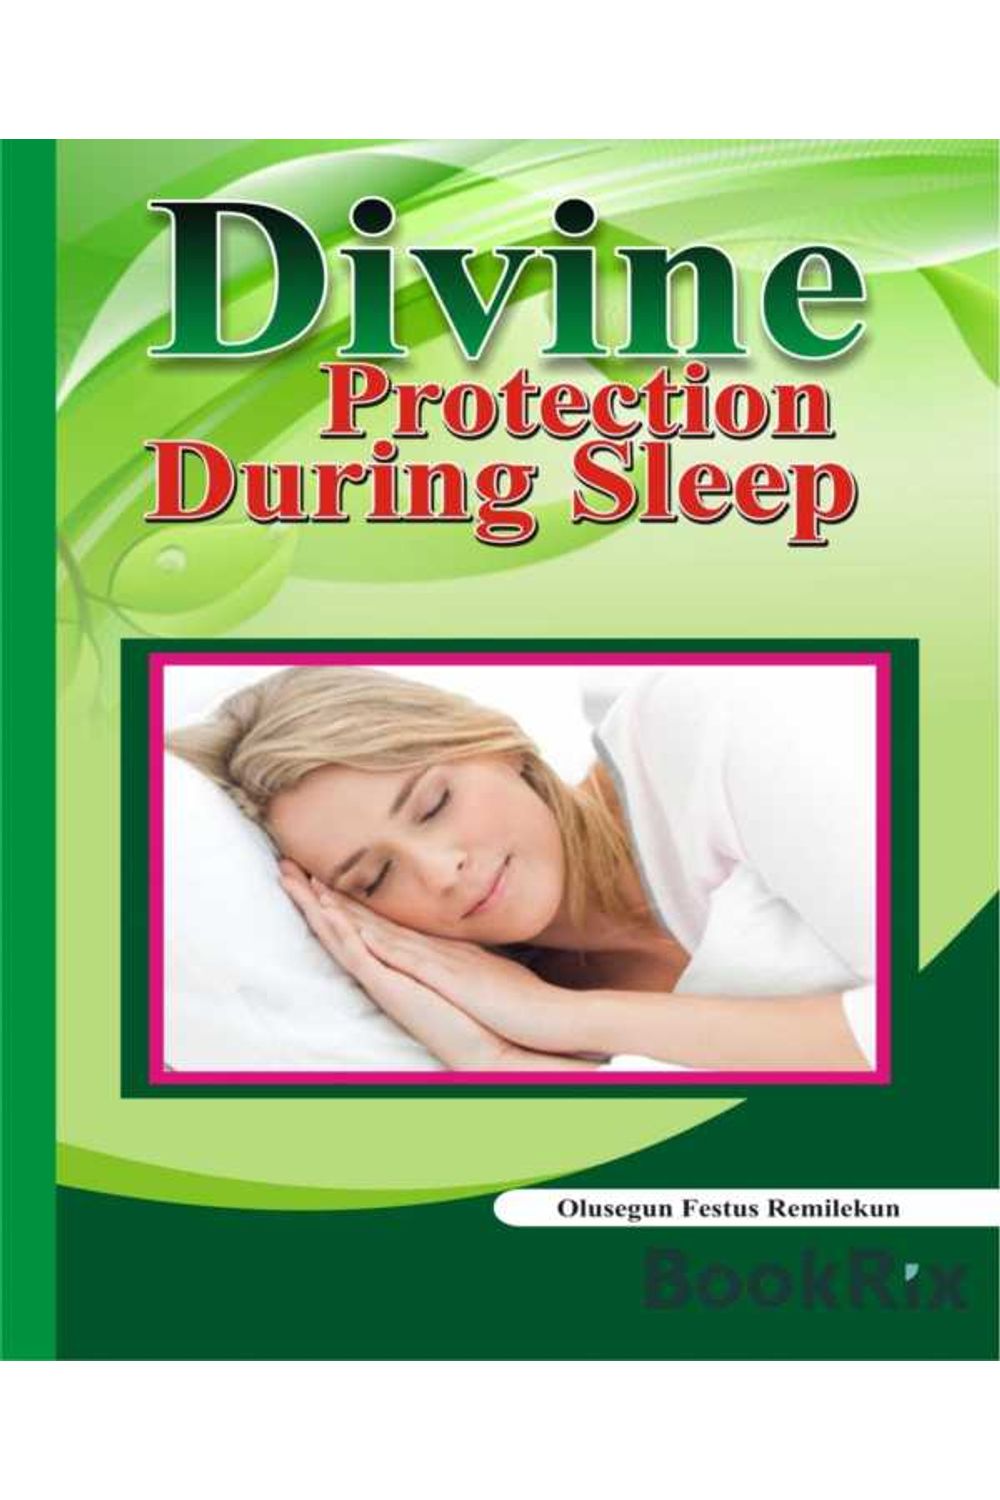 bw-divine-protection-during-sleep-bookrix-9783743868519